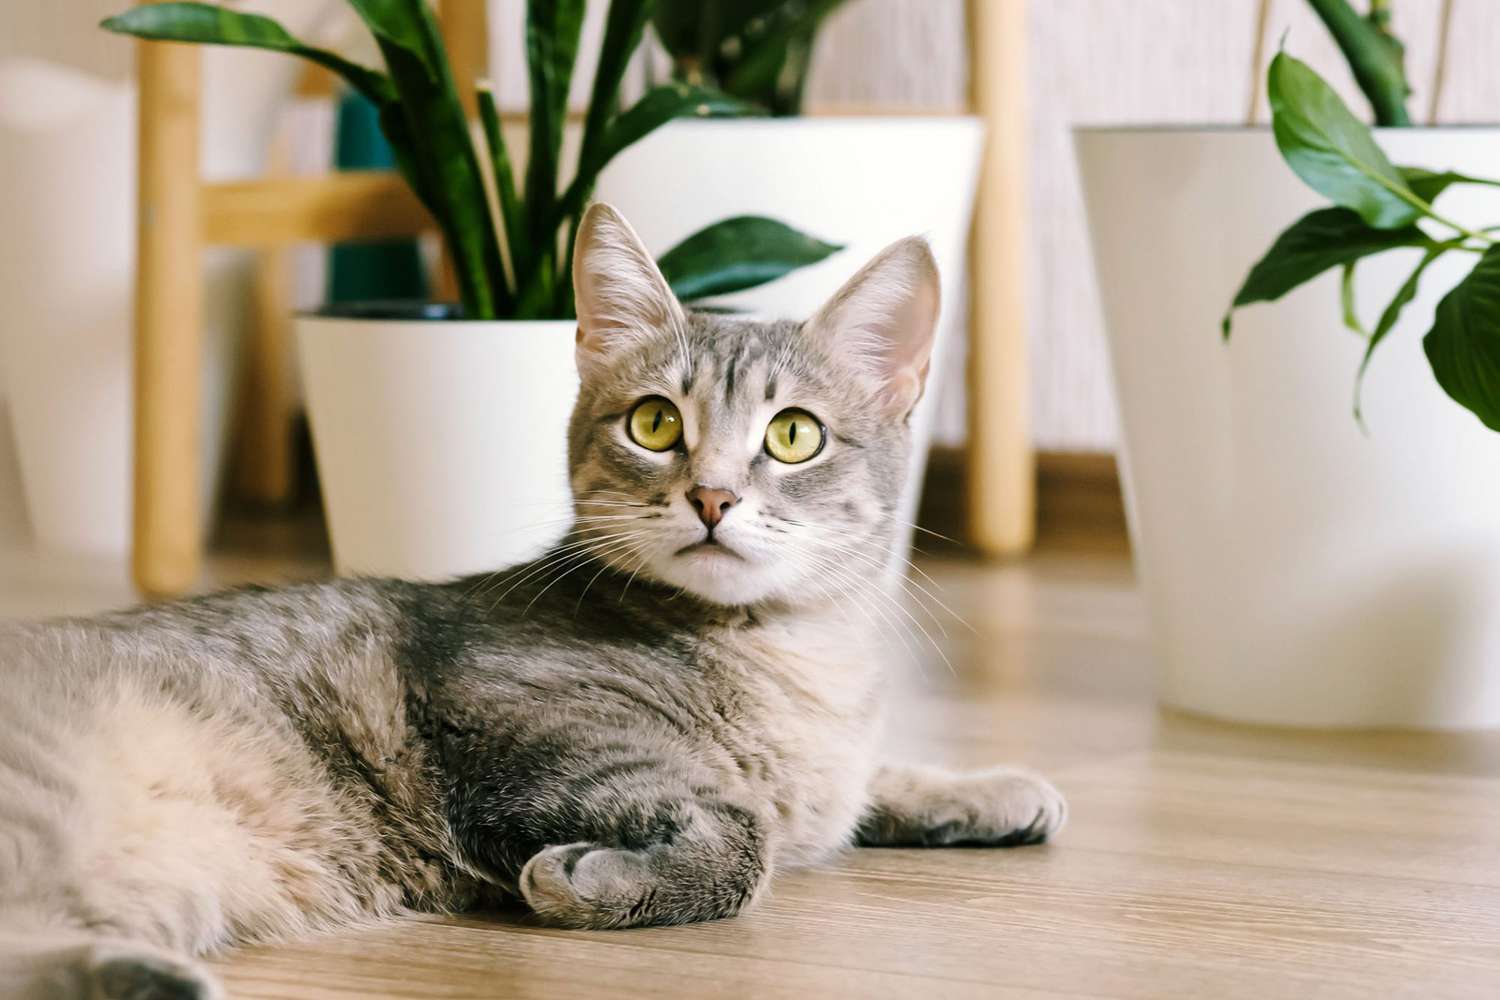 9 Pet Friendly Plants That Are Safe For Cats Daily Paws